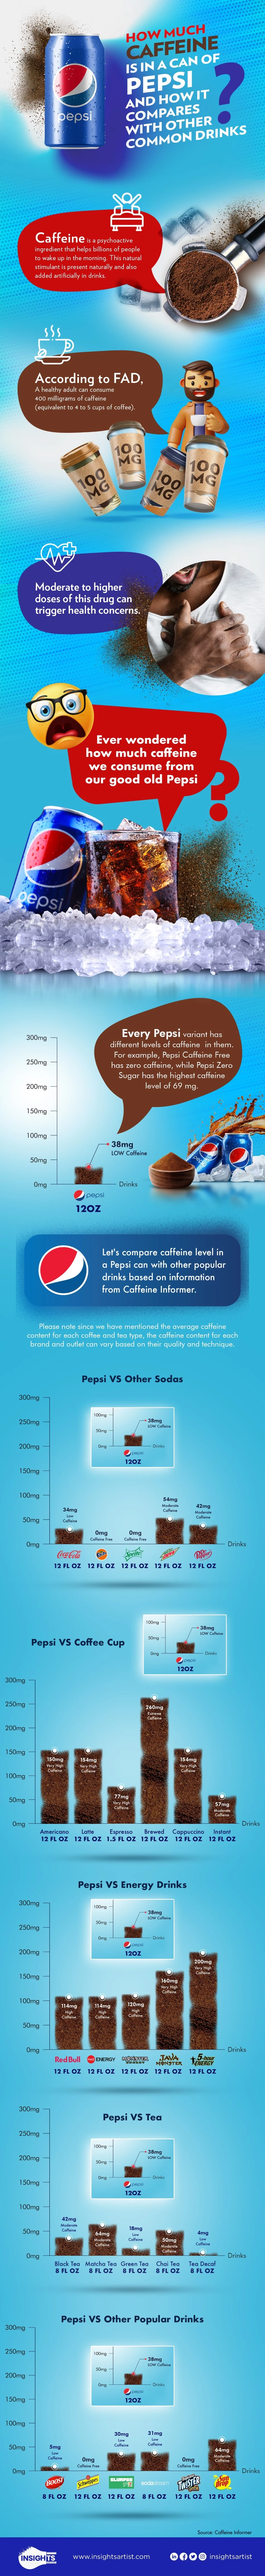 How Much Caffeine Is in a Can of Pepsi